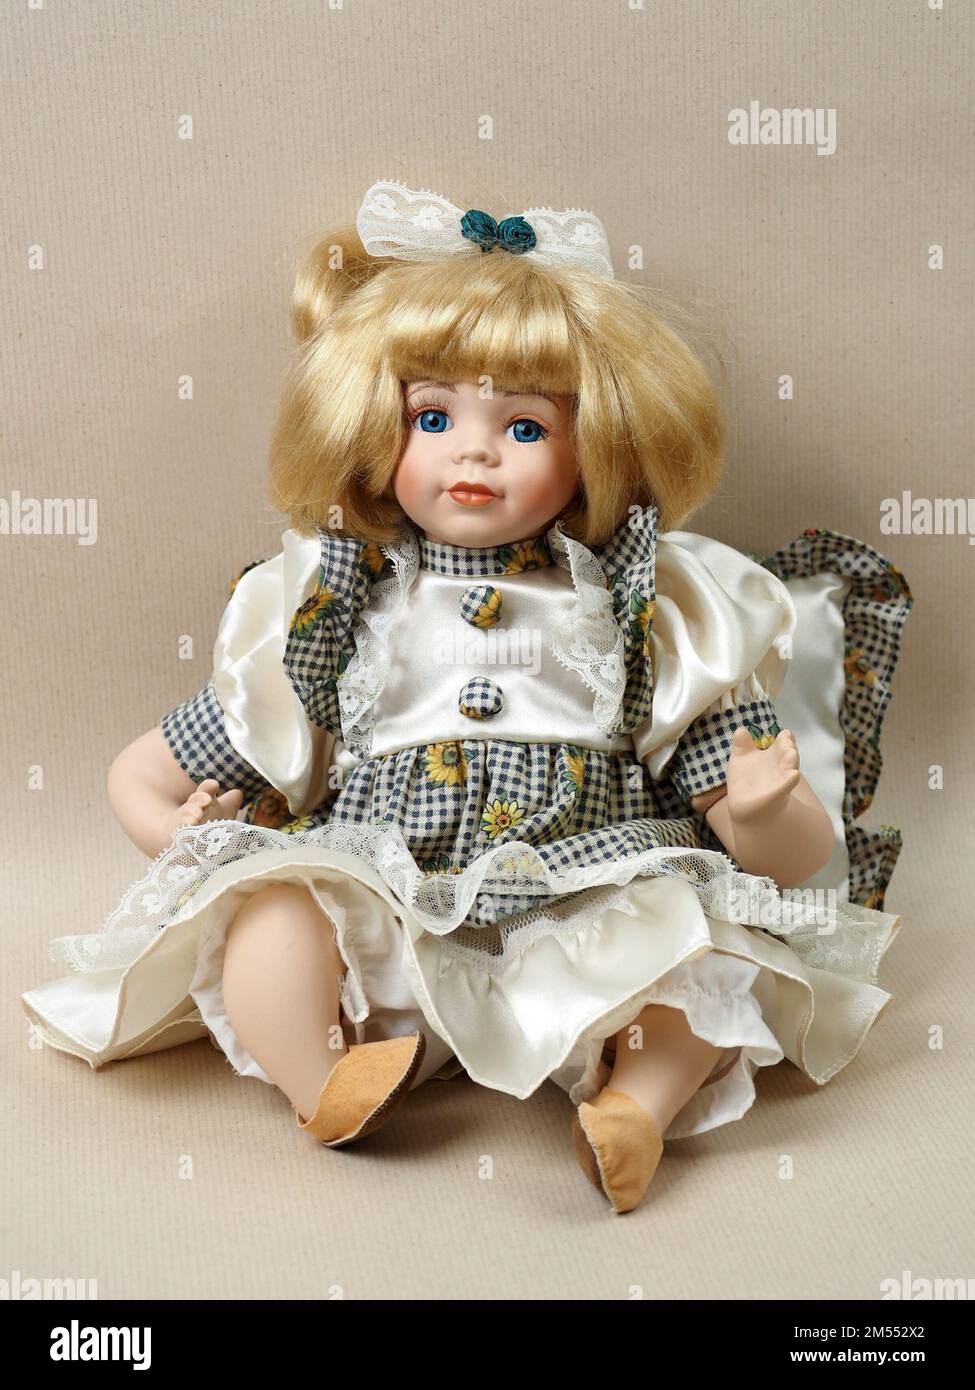 Vintage porcelain doll baby girl with blue eyes, blonde with a bow in her  hair, in a checkered sundress and a white blouse. Porcelain dolls were  popular in the 18th century in